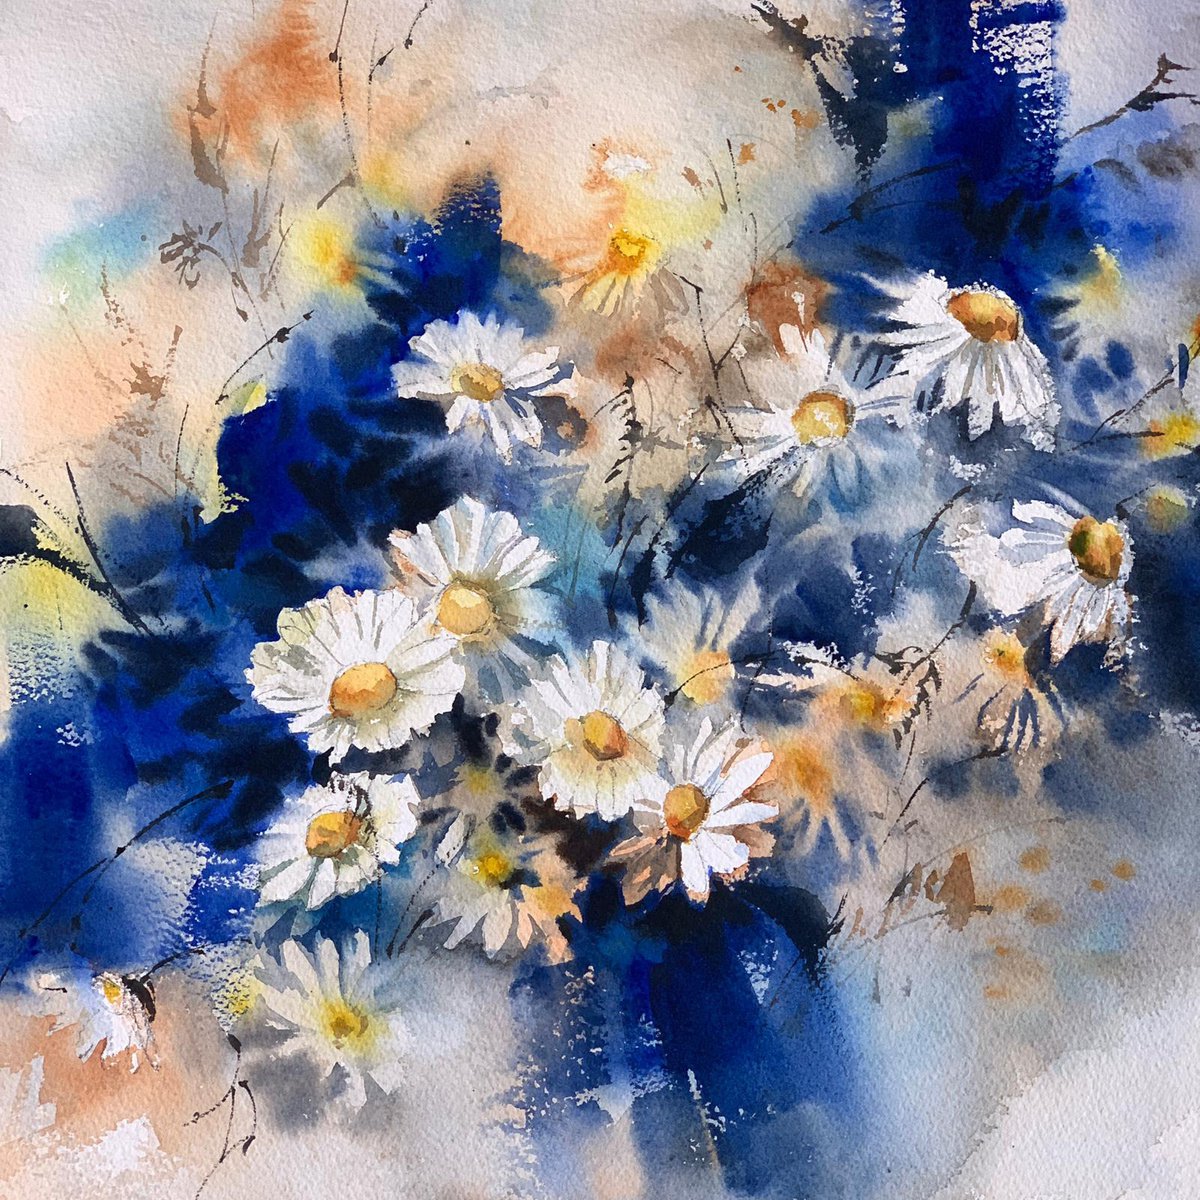 White Daisies Watercolor Painting by Sophie Rodionov